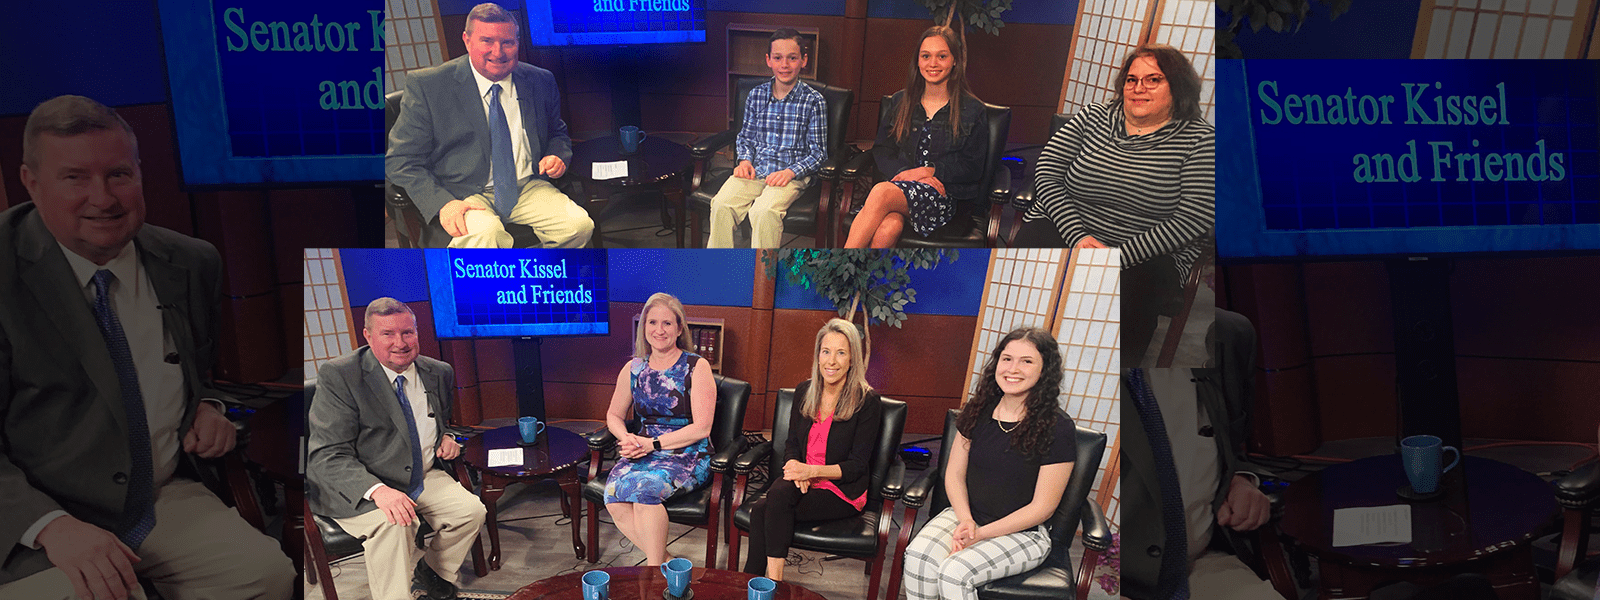 (Watch) Somers spelling bee champs and ACC featured on “Senator Kissel and Friends”